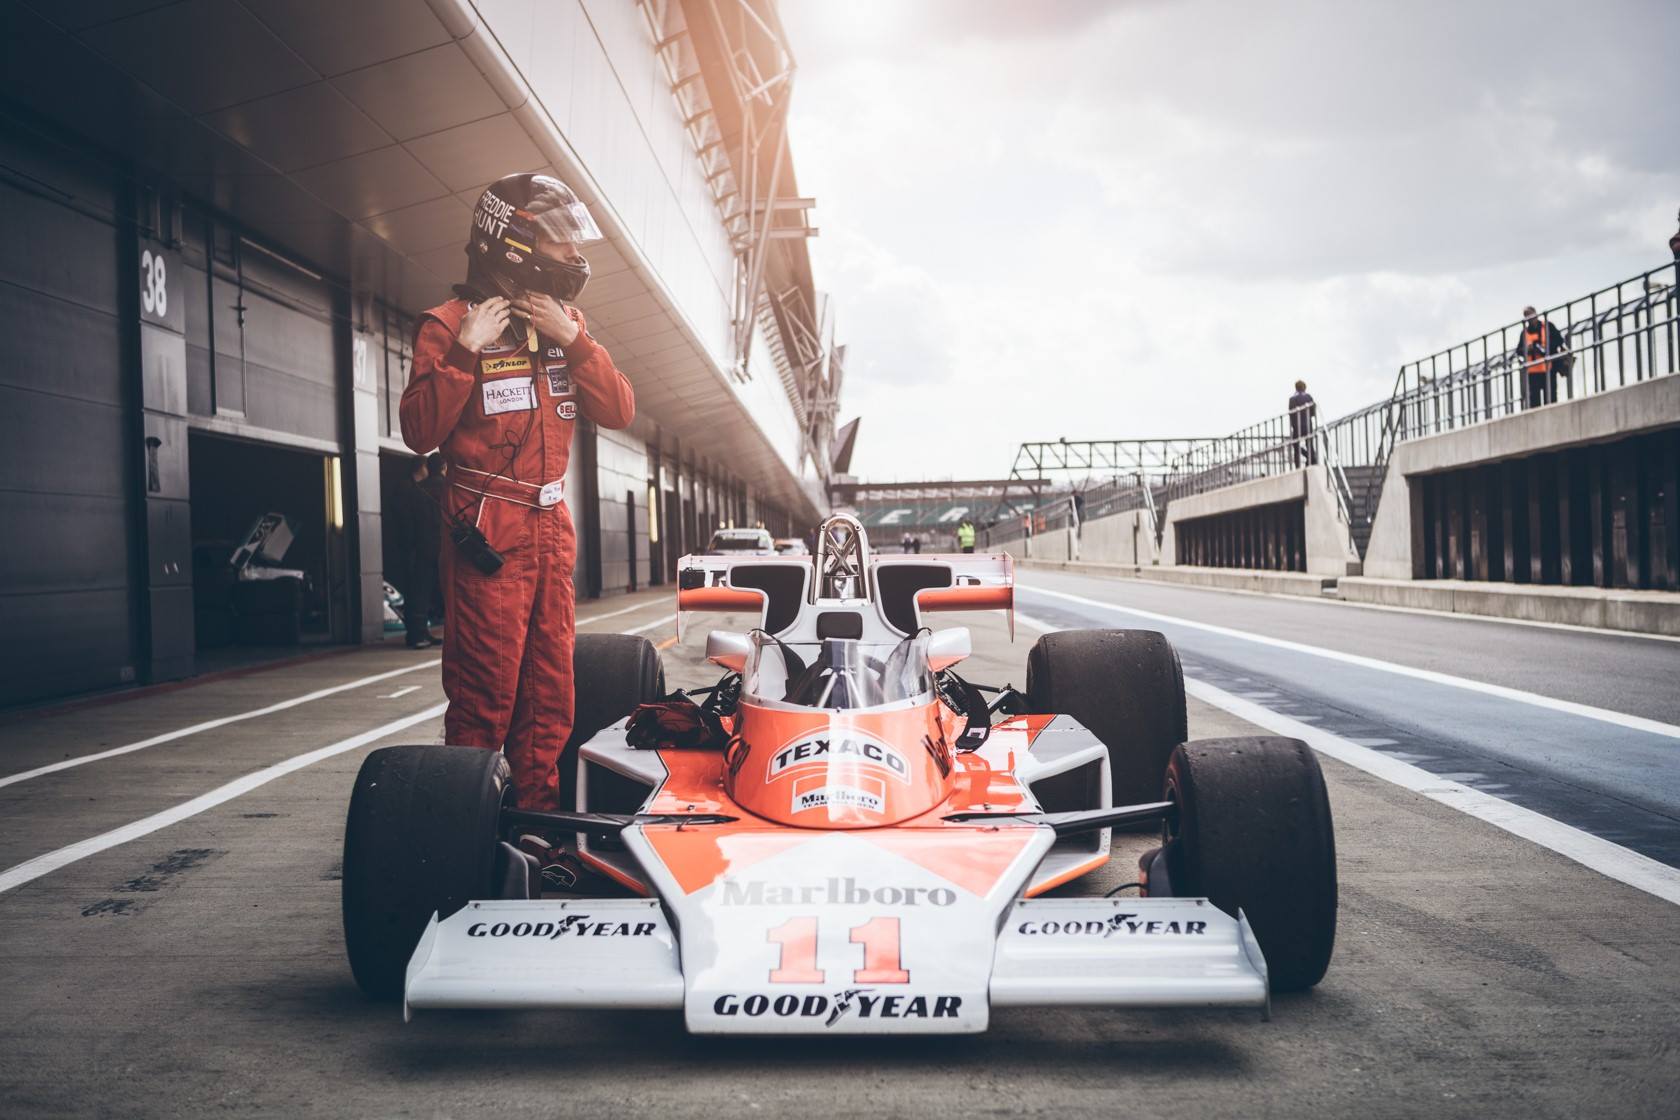 The McLaren M23 driven by Freddie Hunt at Silverstone in April 2016 and with McLaren Team Manager Alastair Caldwell overlooking.